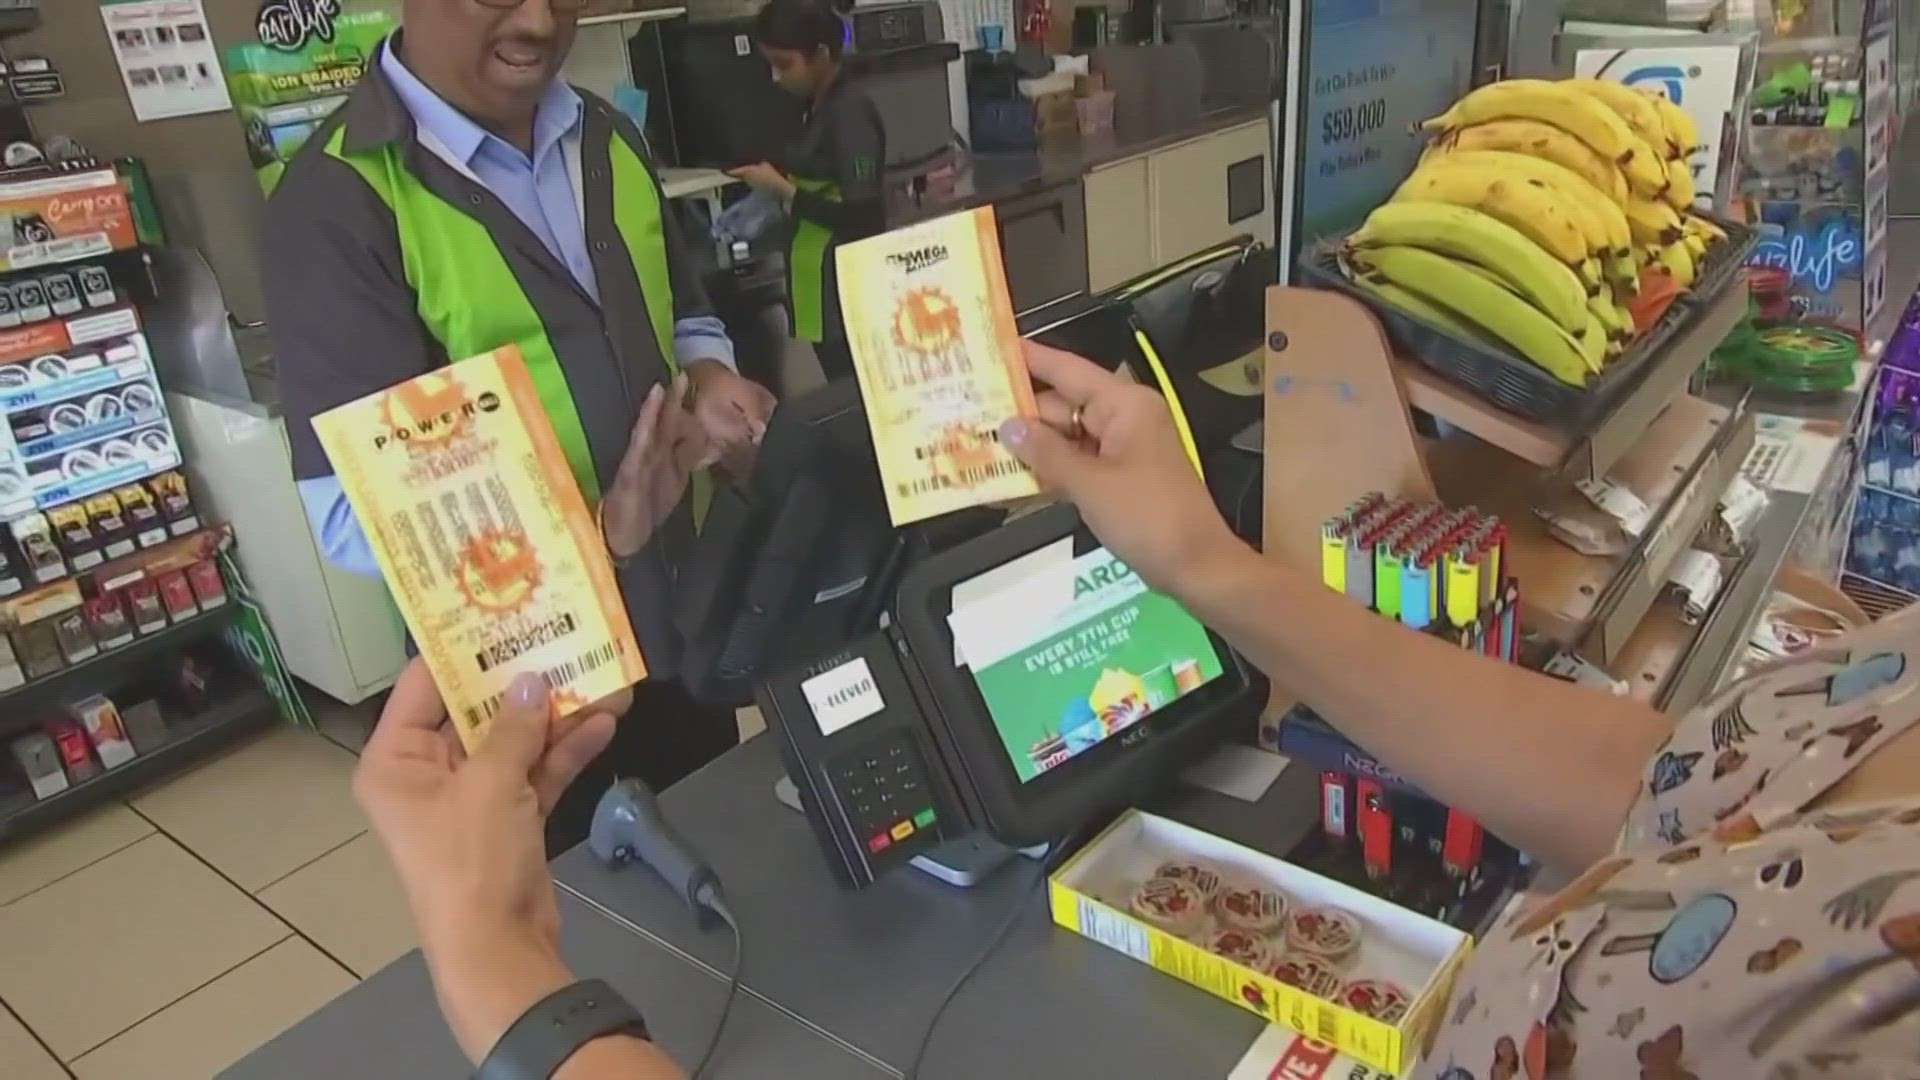 Feeling lucky? Get your lottery tickets because the Powerball jackpot is now worth $1.2 billion.